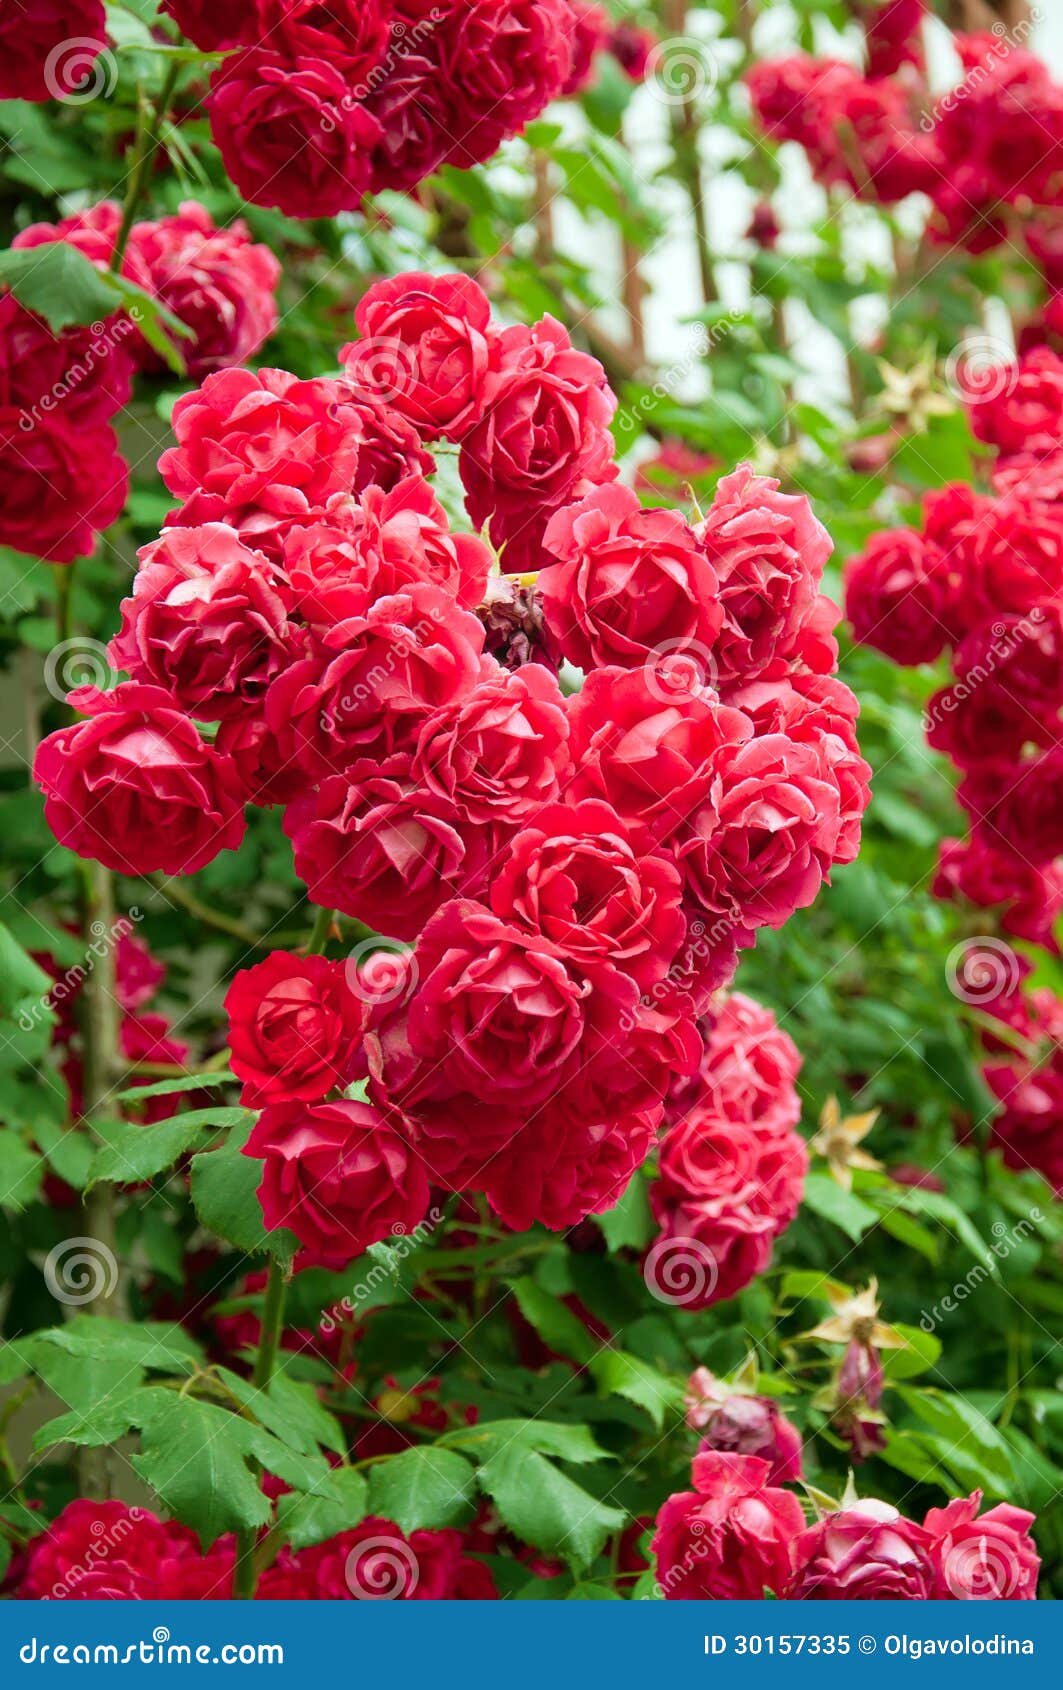 Rose Flower Bed In Garden Royalty Free Stock Photo - Image 